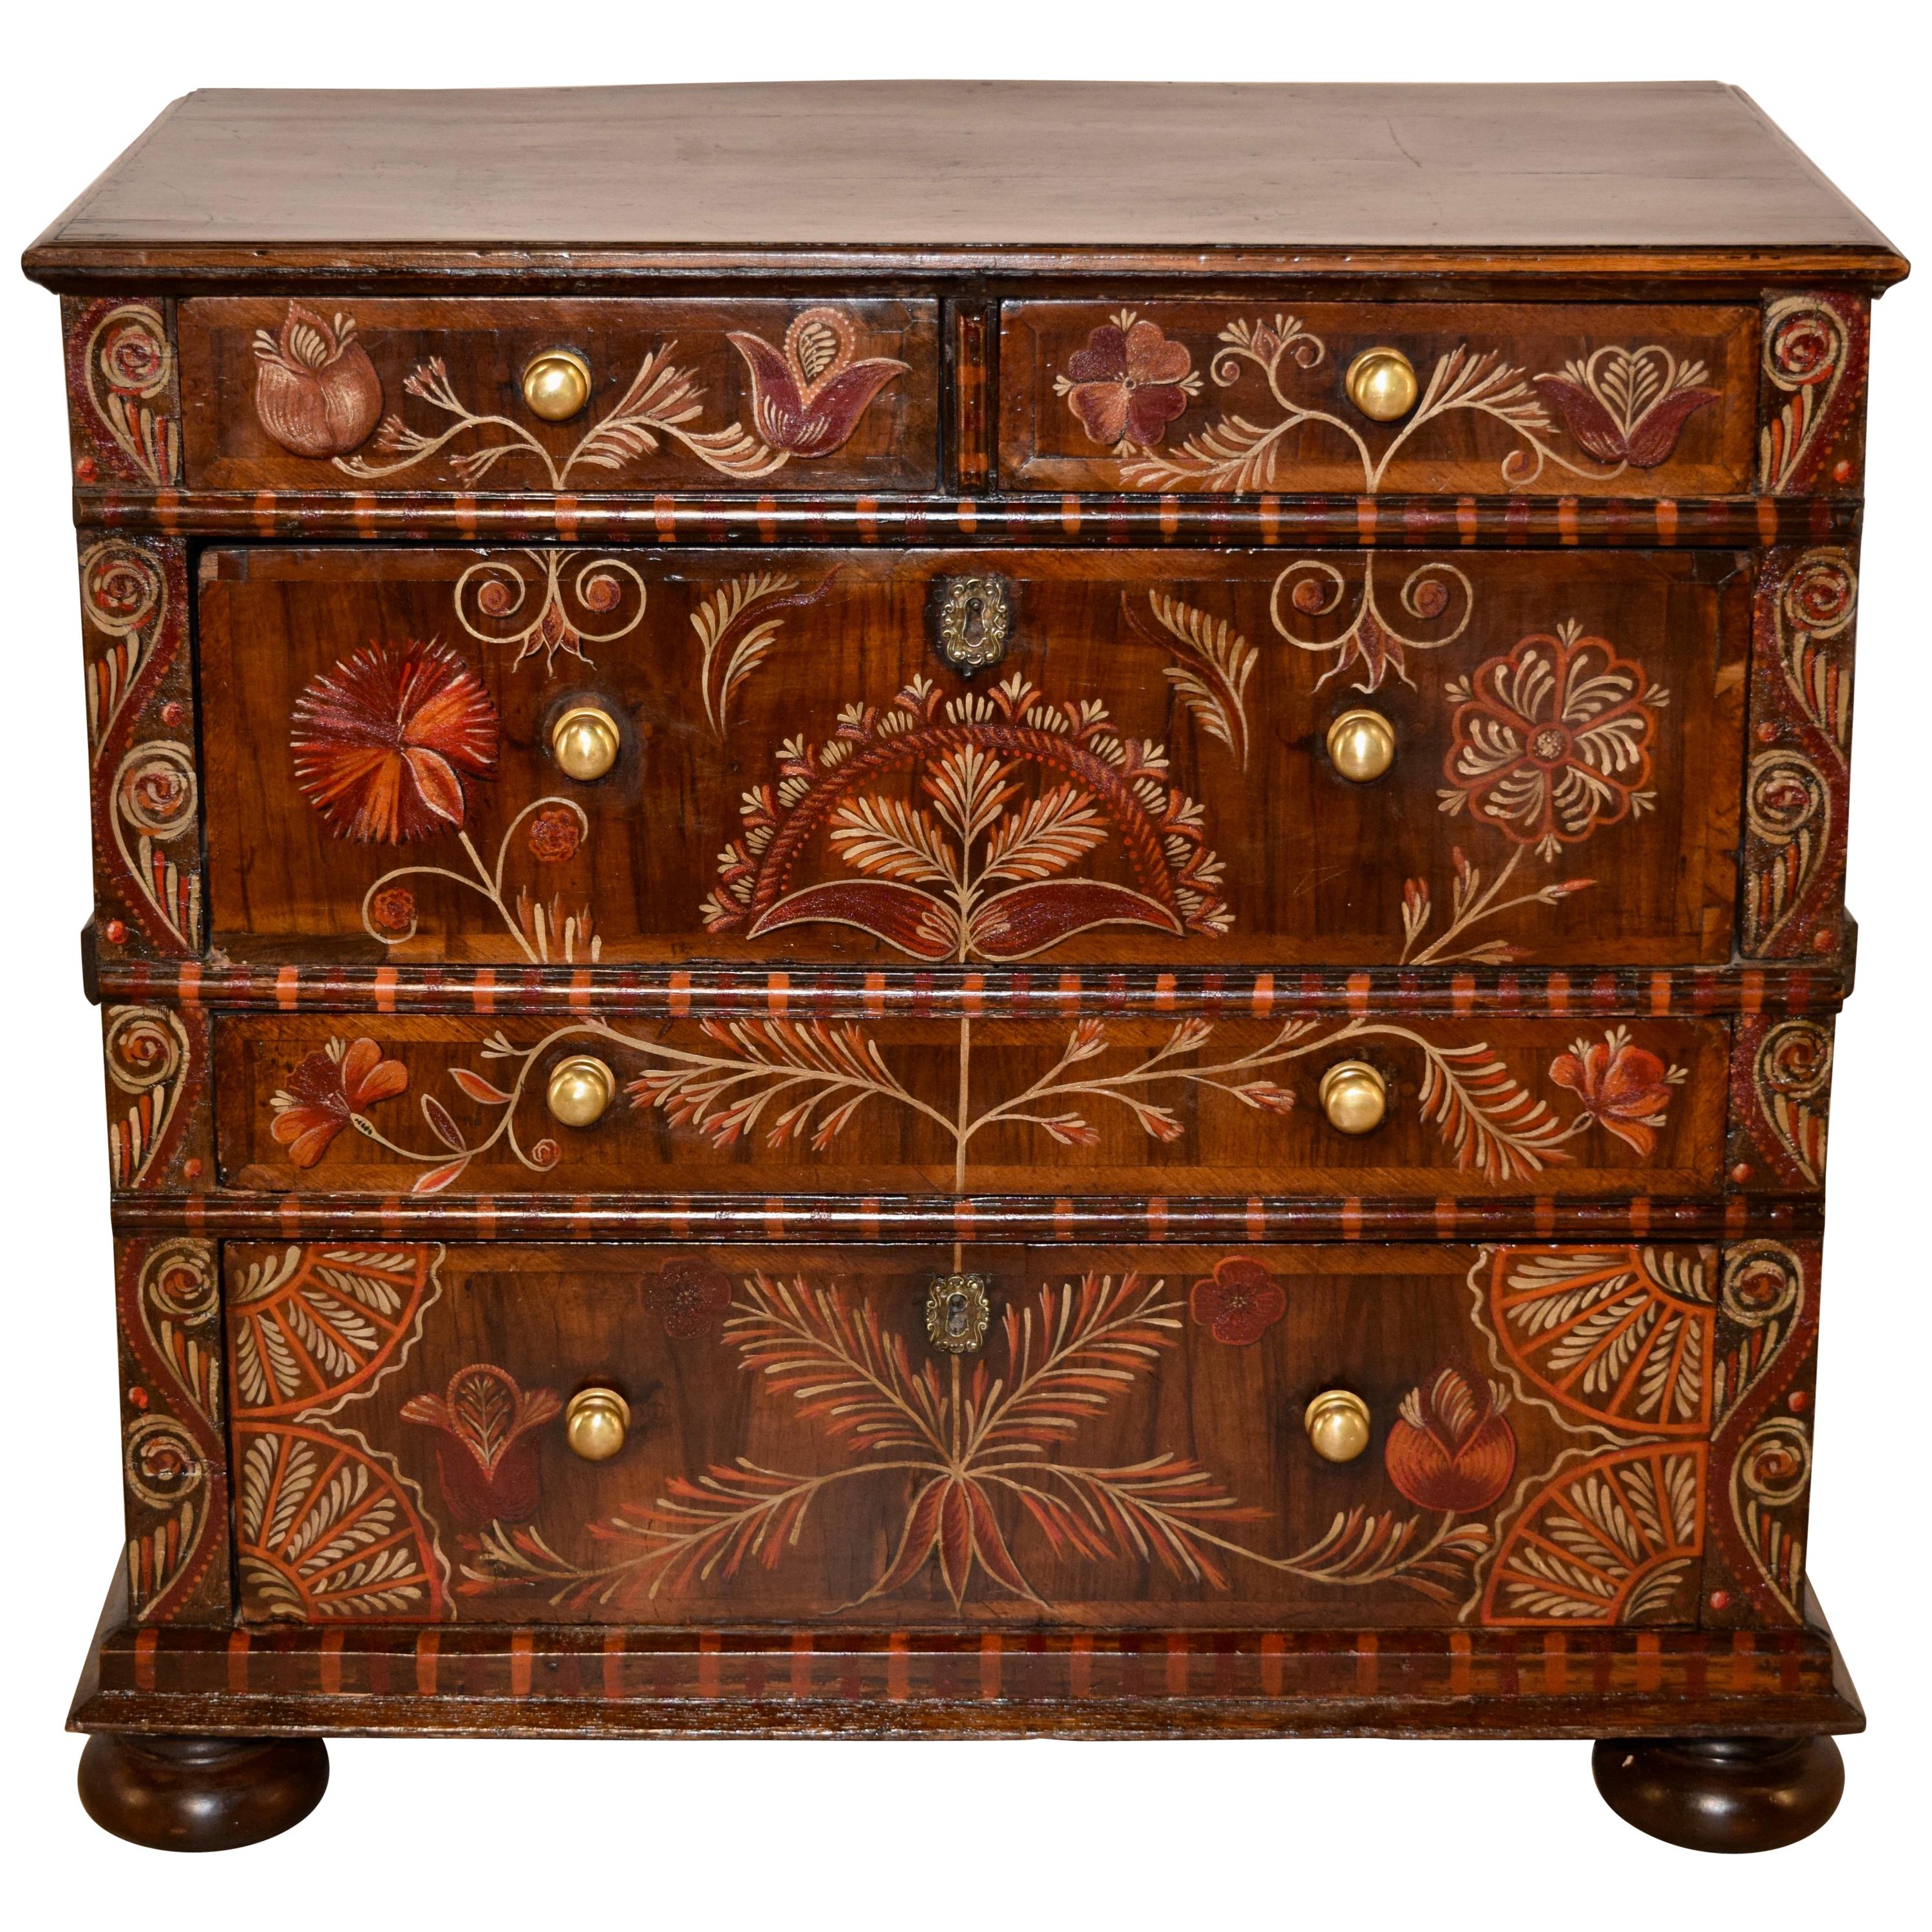 18th Century English Painted Chest of Drawers